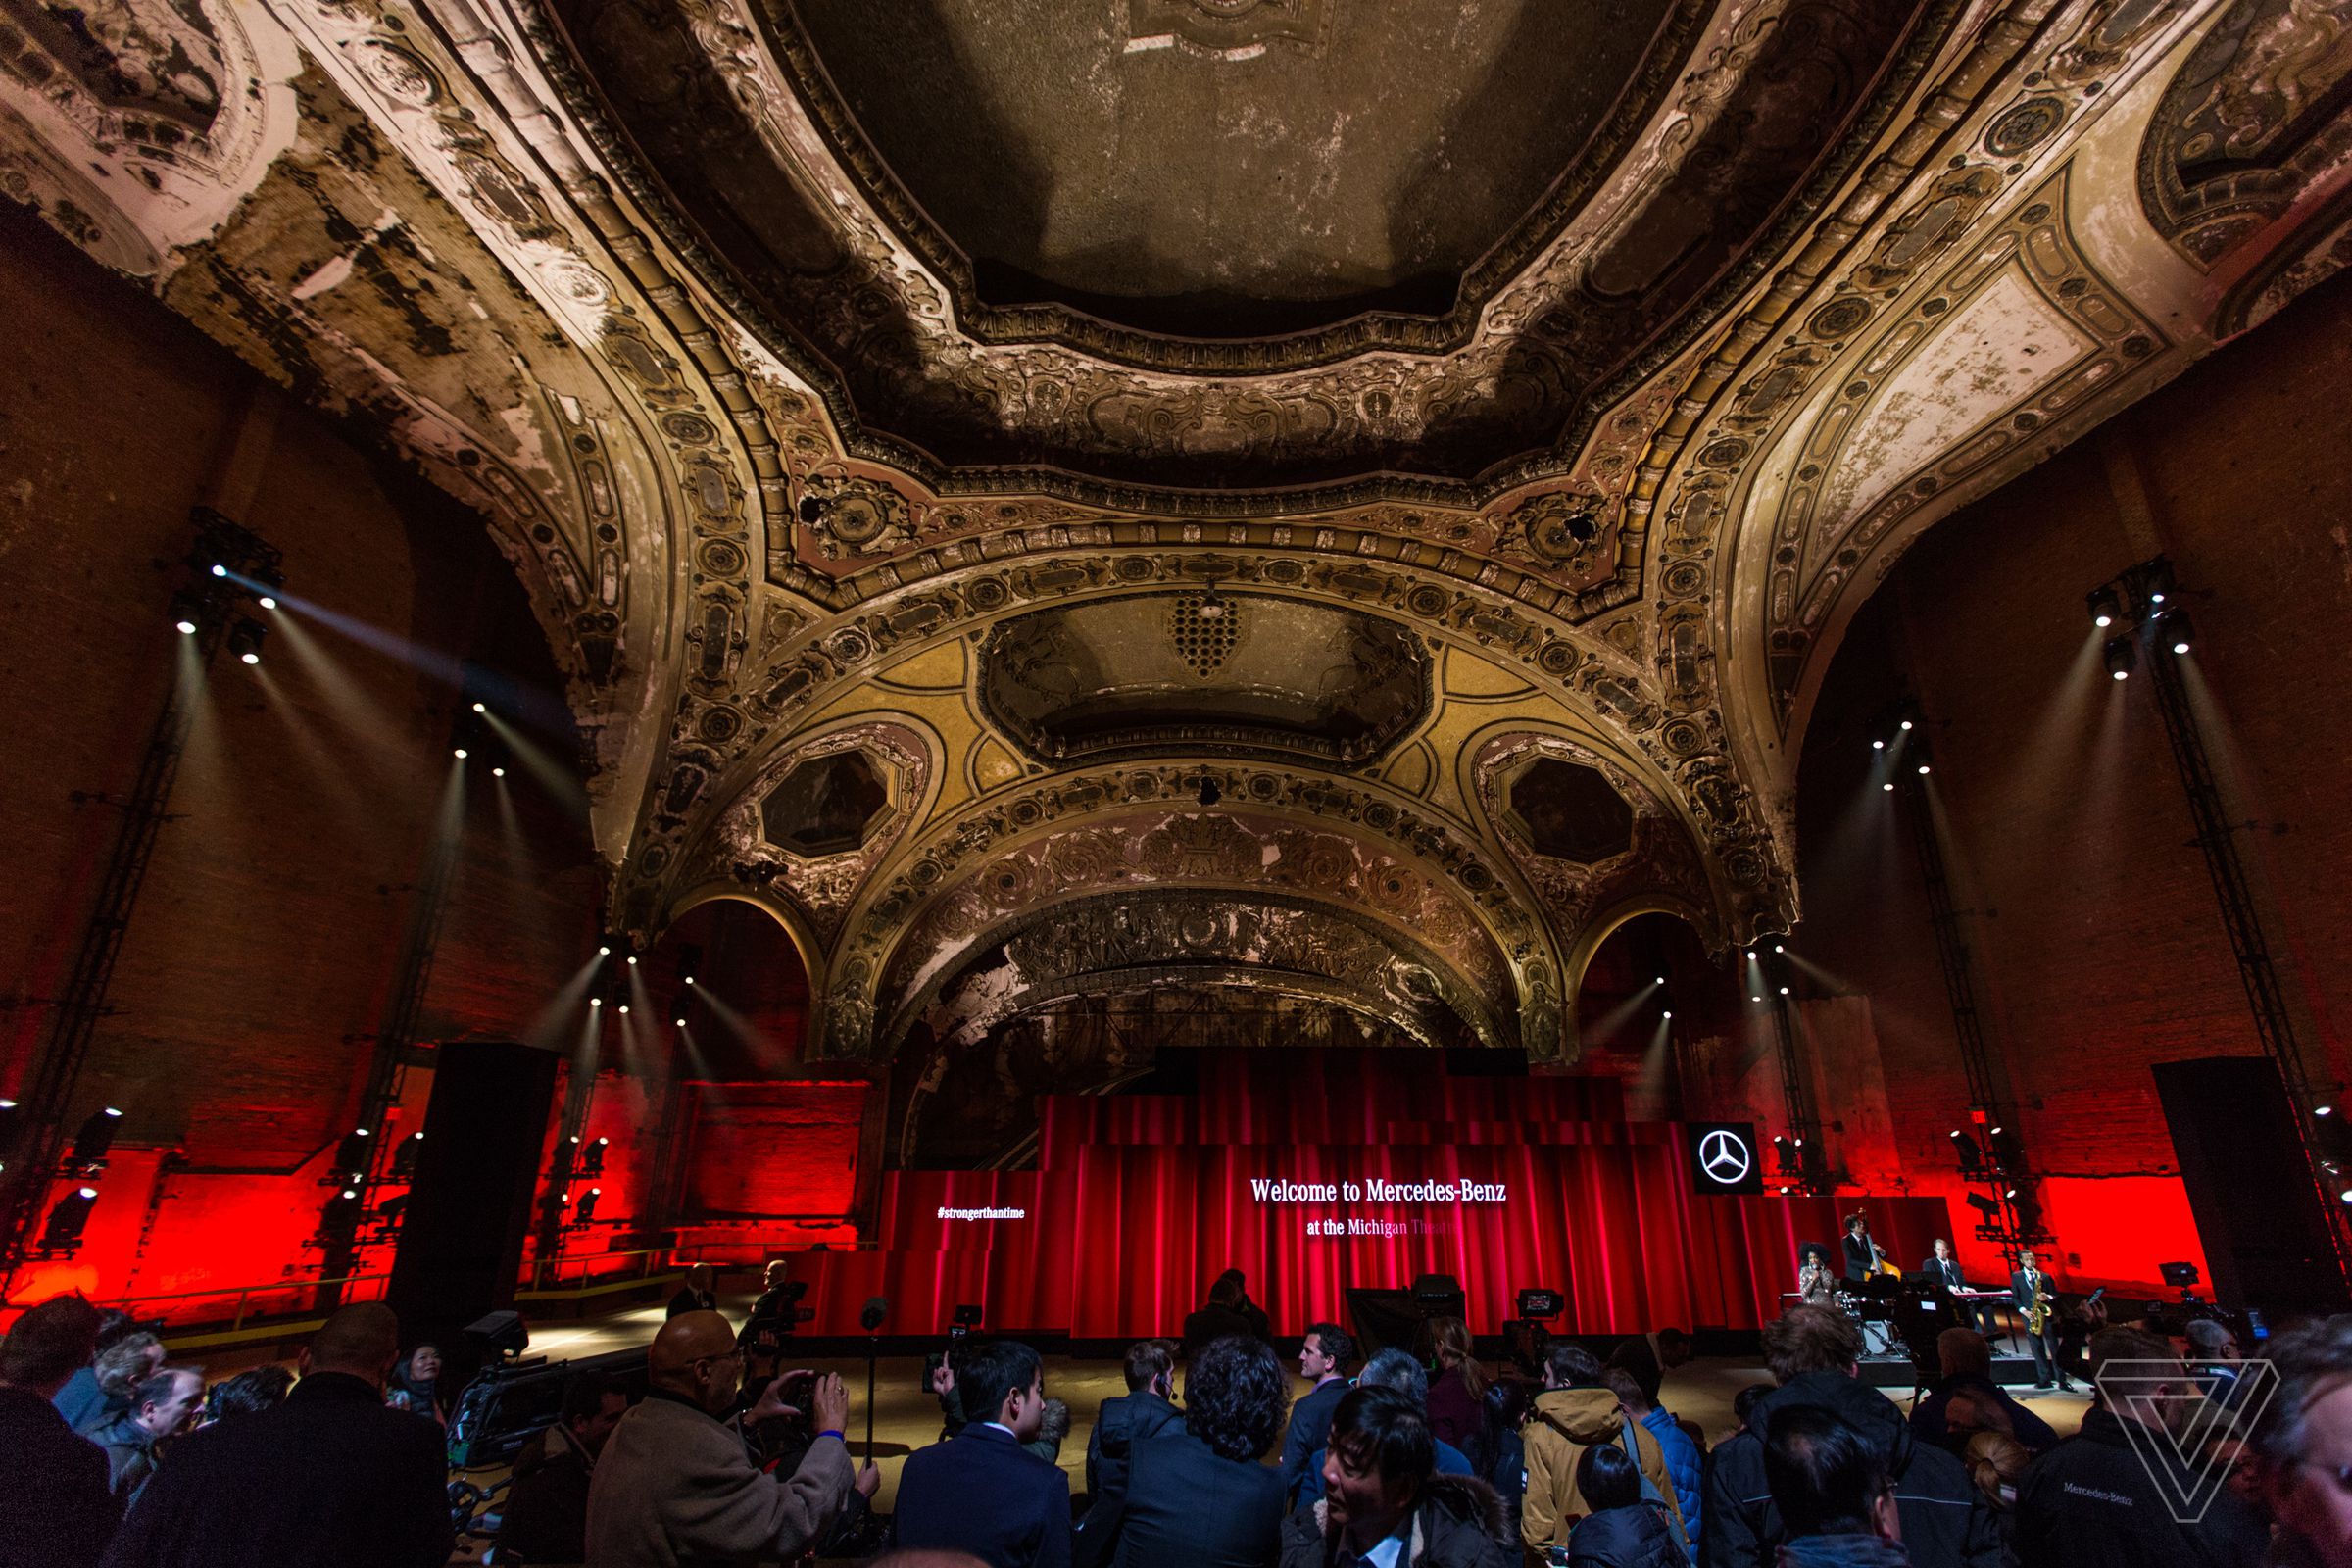 The Mercedes-Benz event was held at the abandoned Michigan Theater, which has languished since the late 1970s. The theater was built on the same site where Henry Ford built his first automobile. 